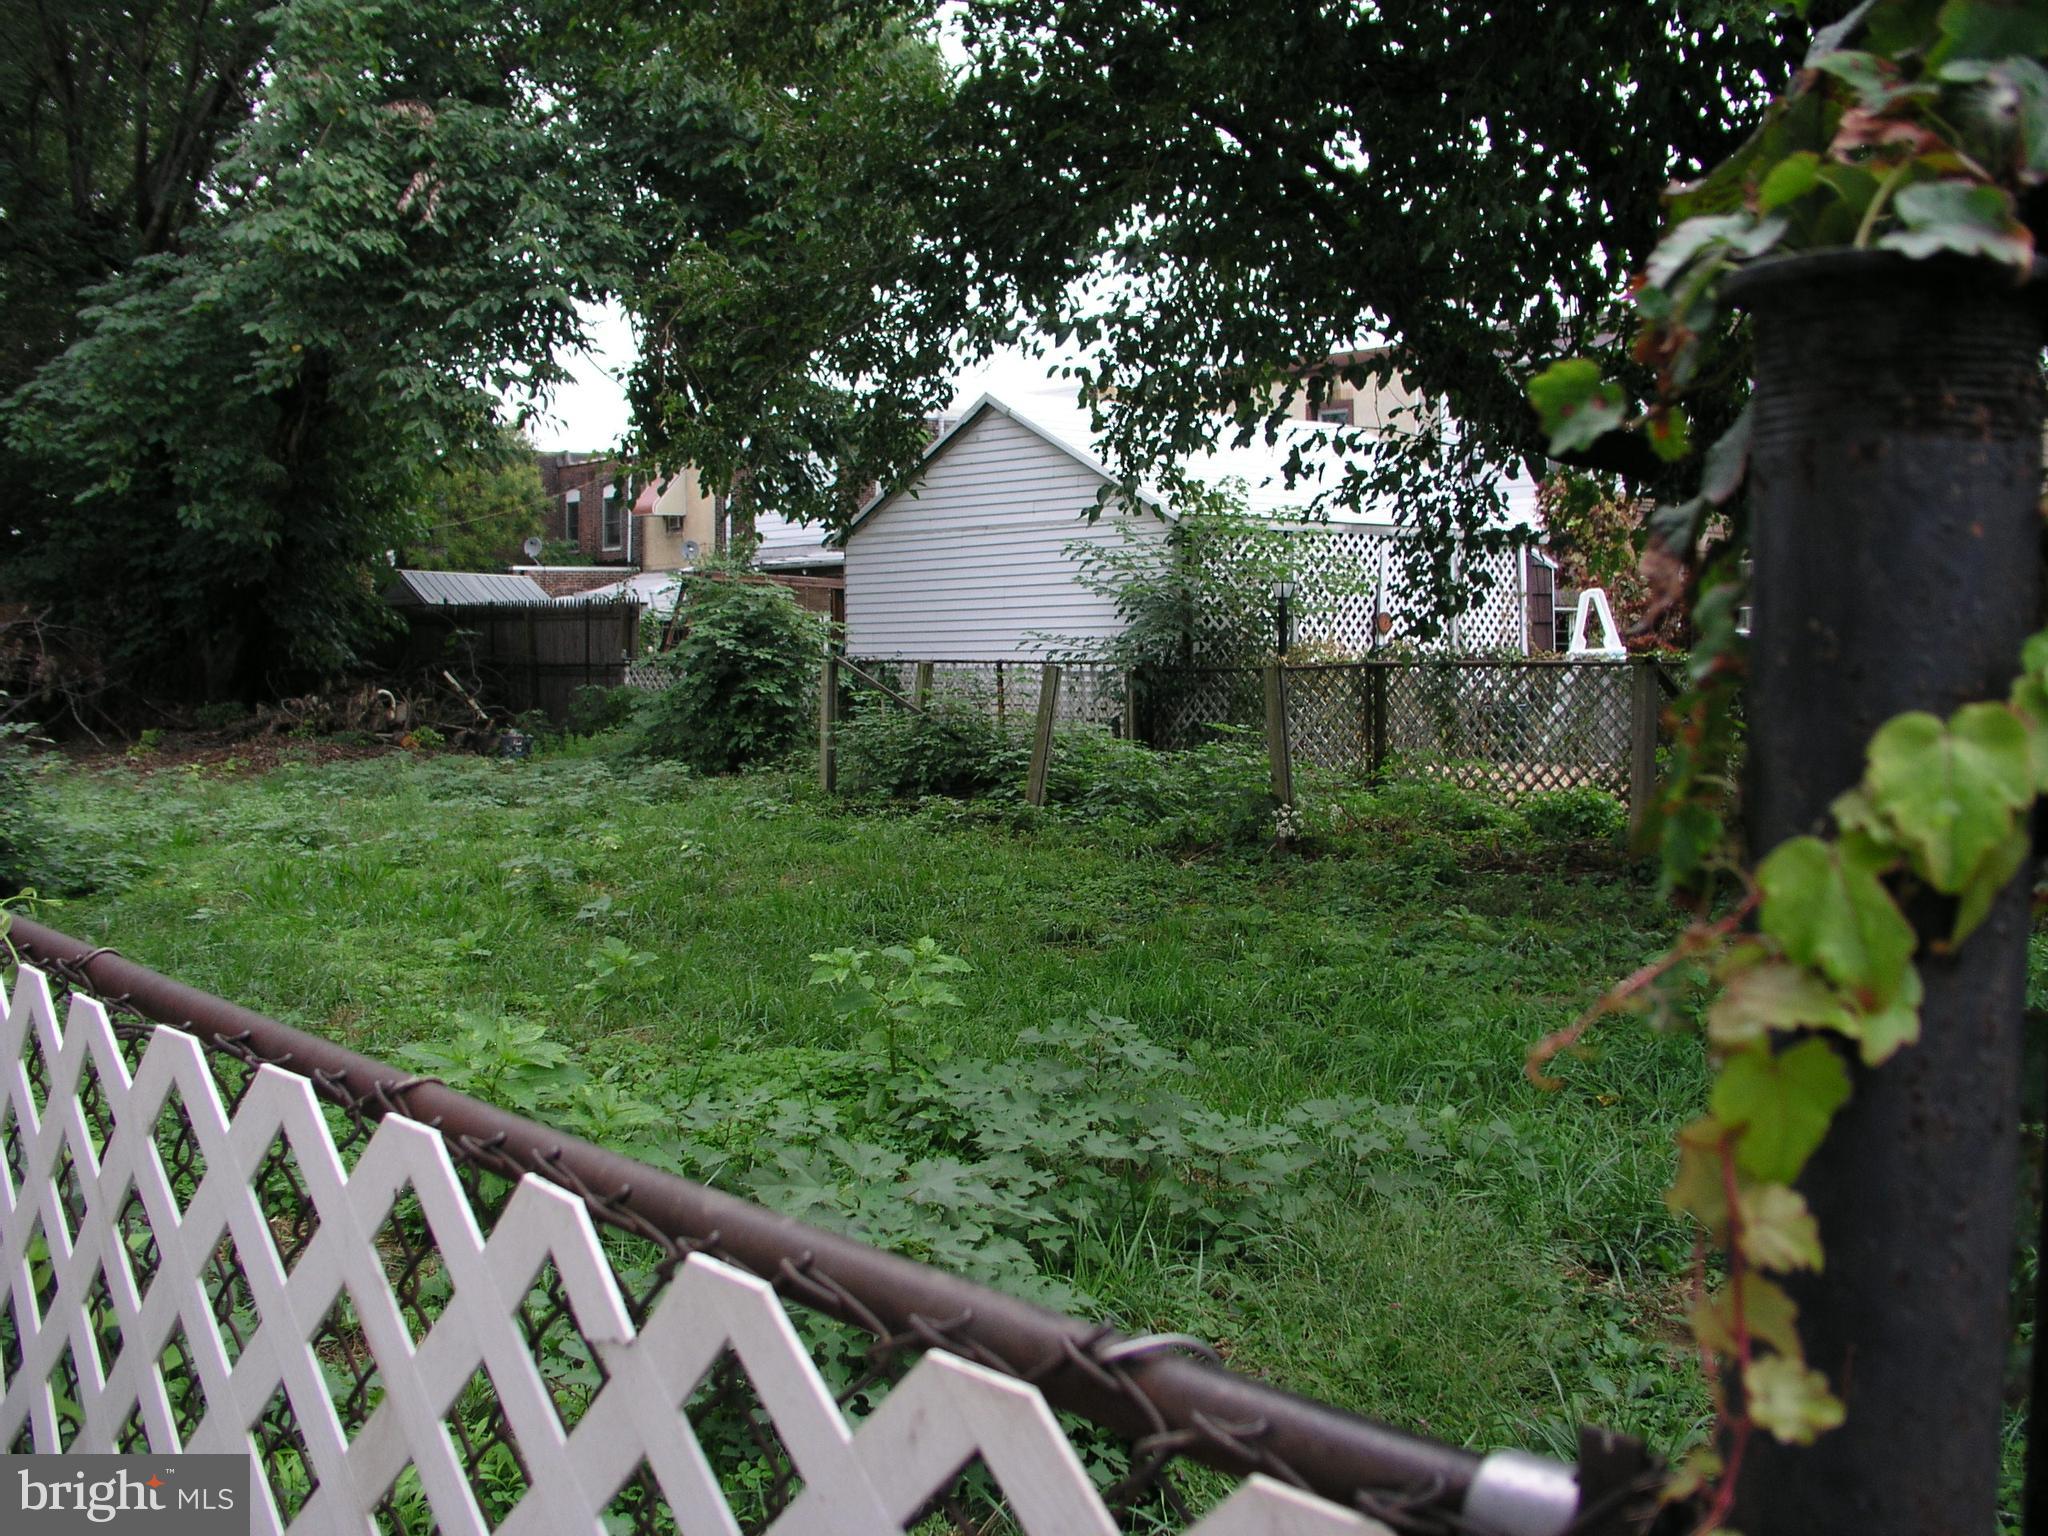 a view of a house with backyard